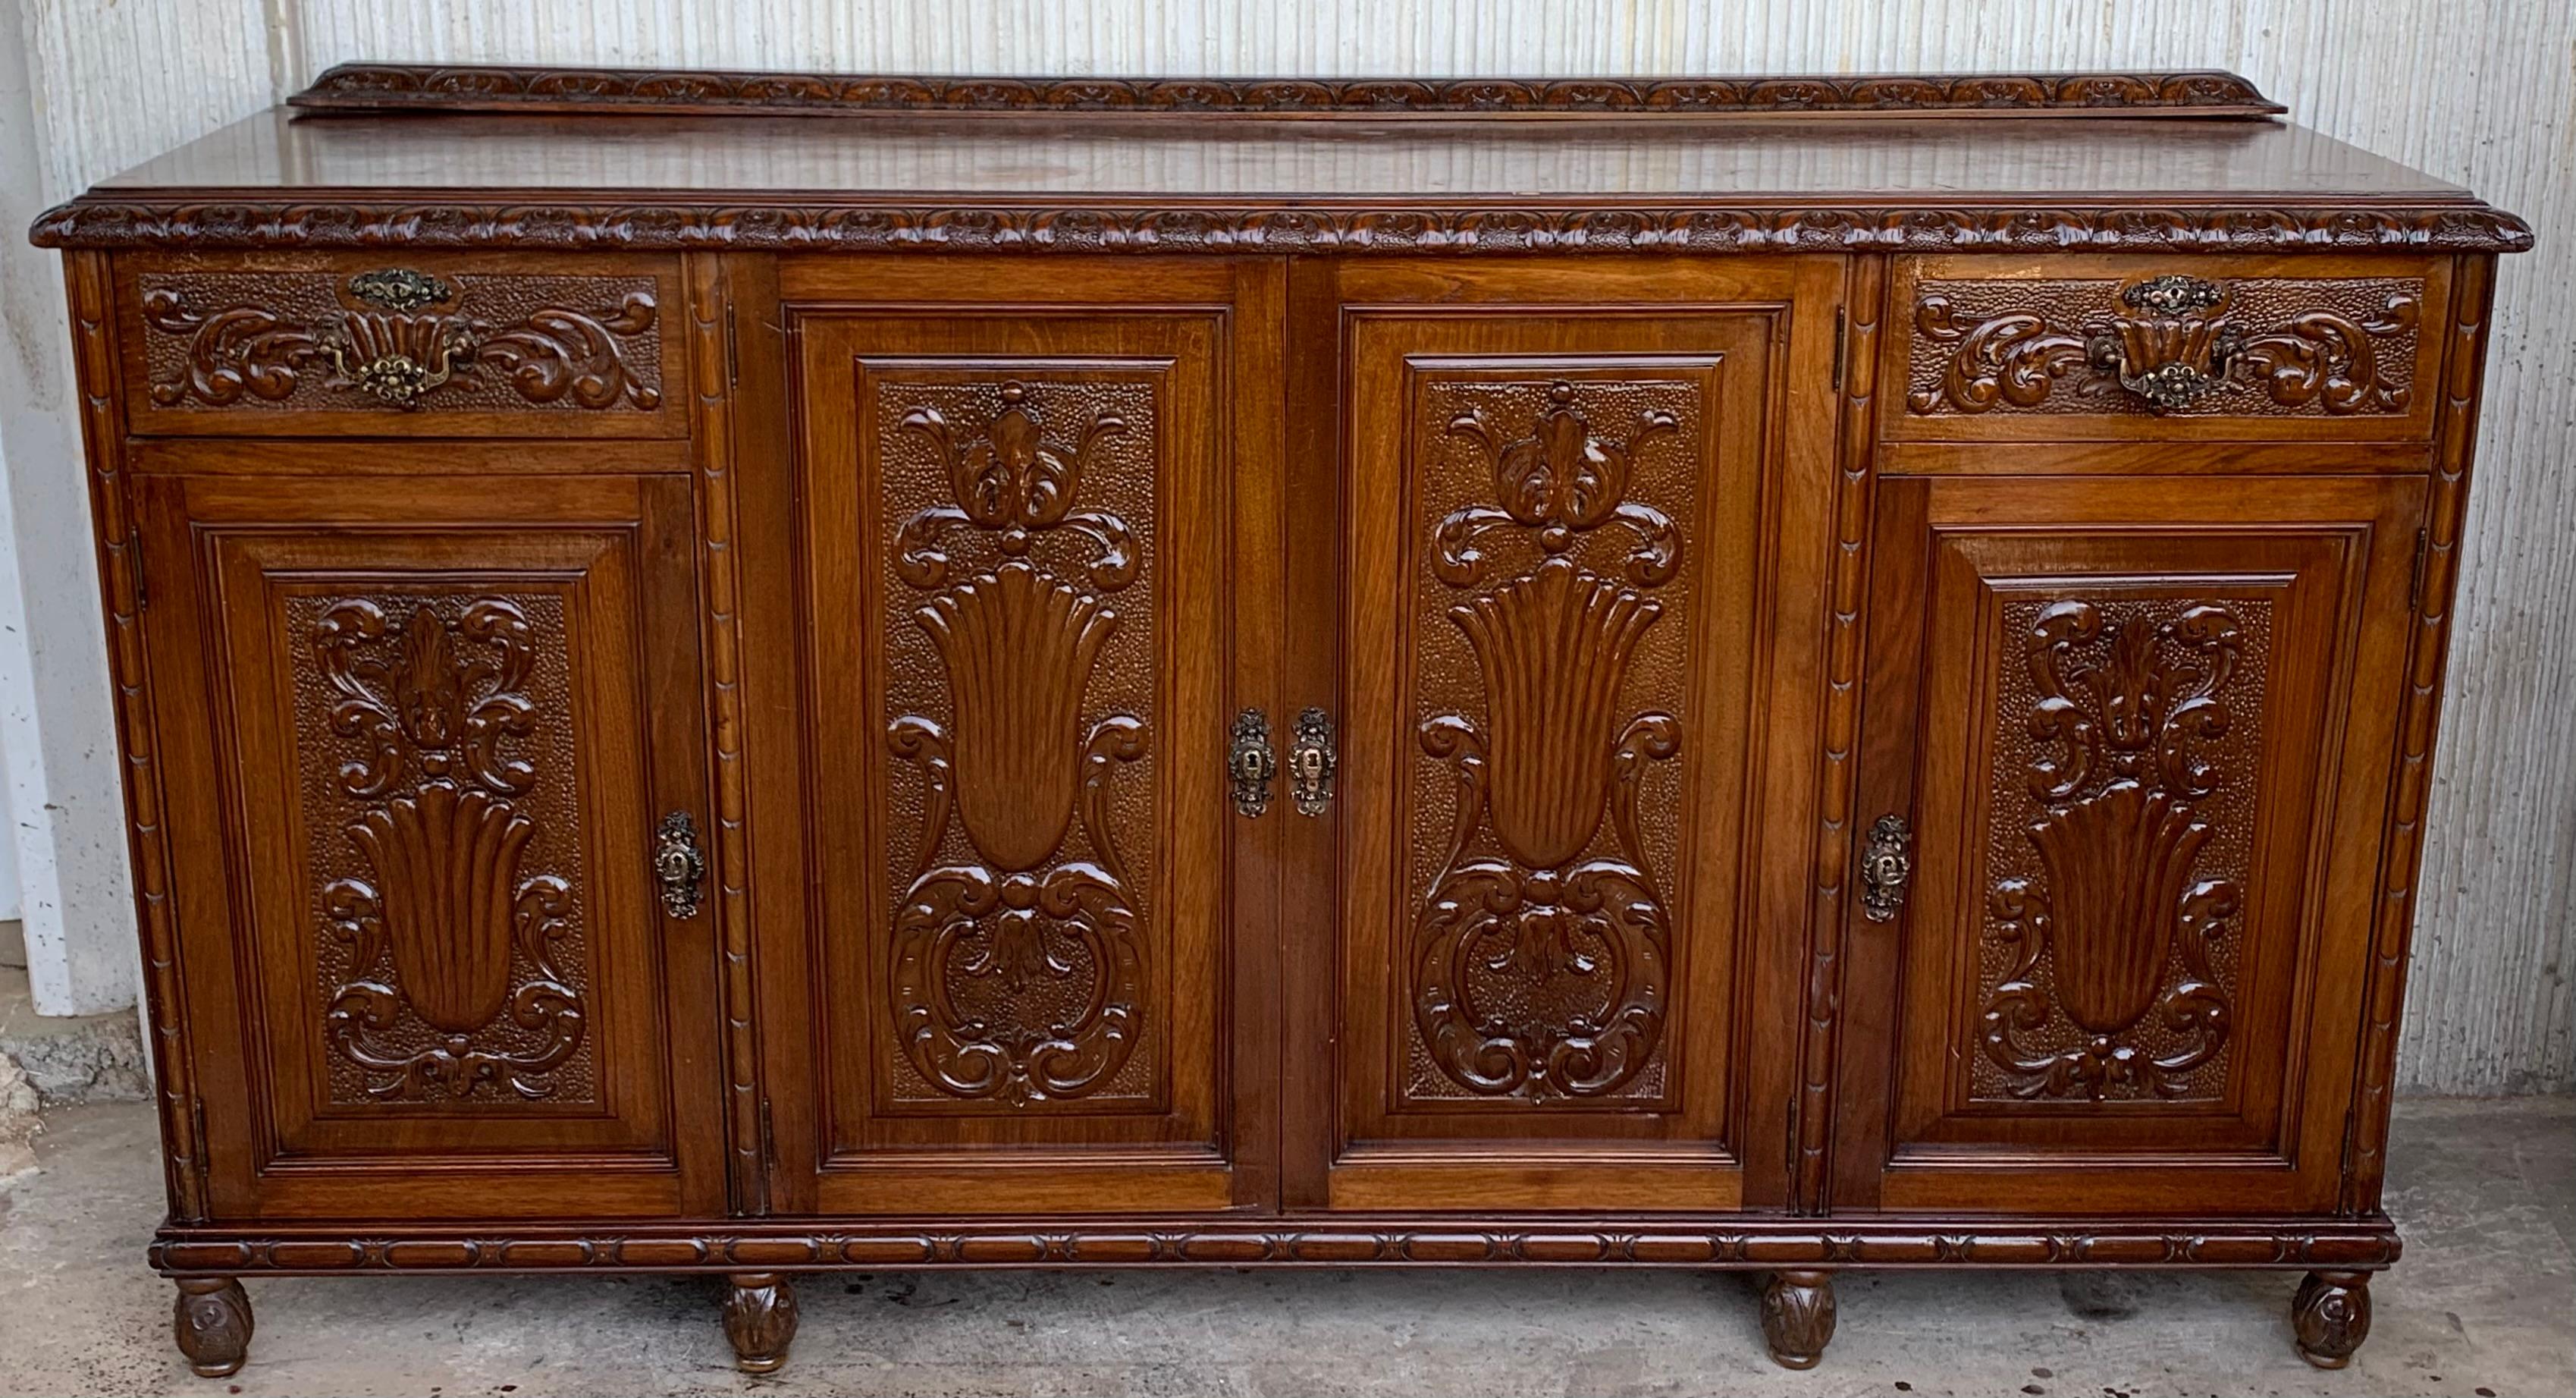 Early 20th carved walnut sideboard with four doors and two drawers
Elaborate carved walnut sideboard from Spain is topped with a wood top. Two dove-tailed drawers are accented with bronze hardware. Four doors open for ample storage. The shelves on